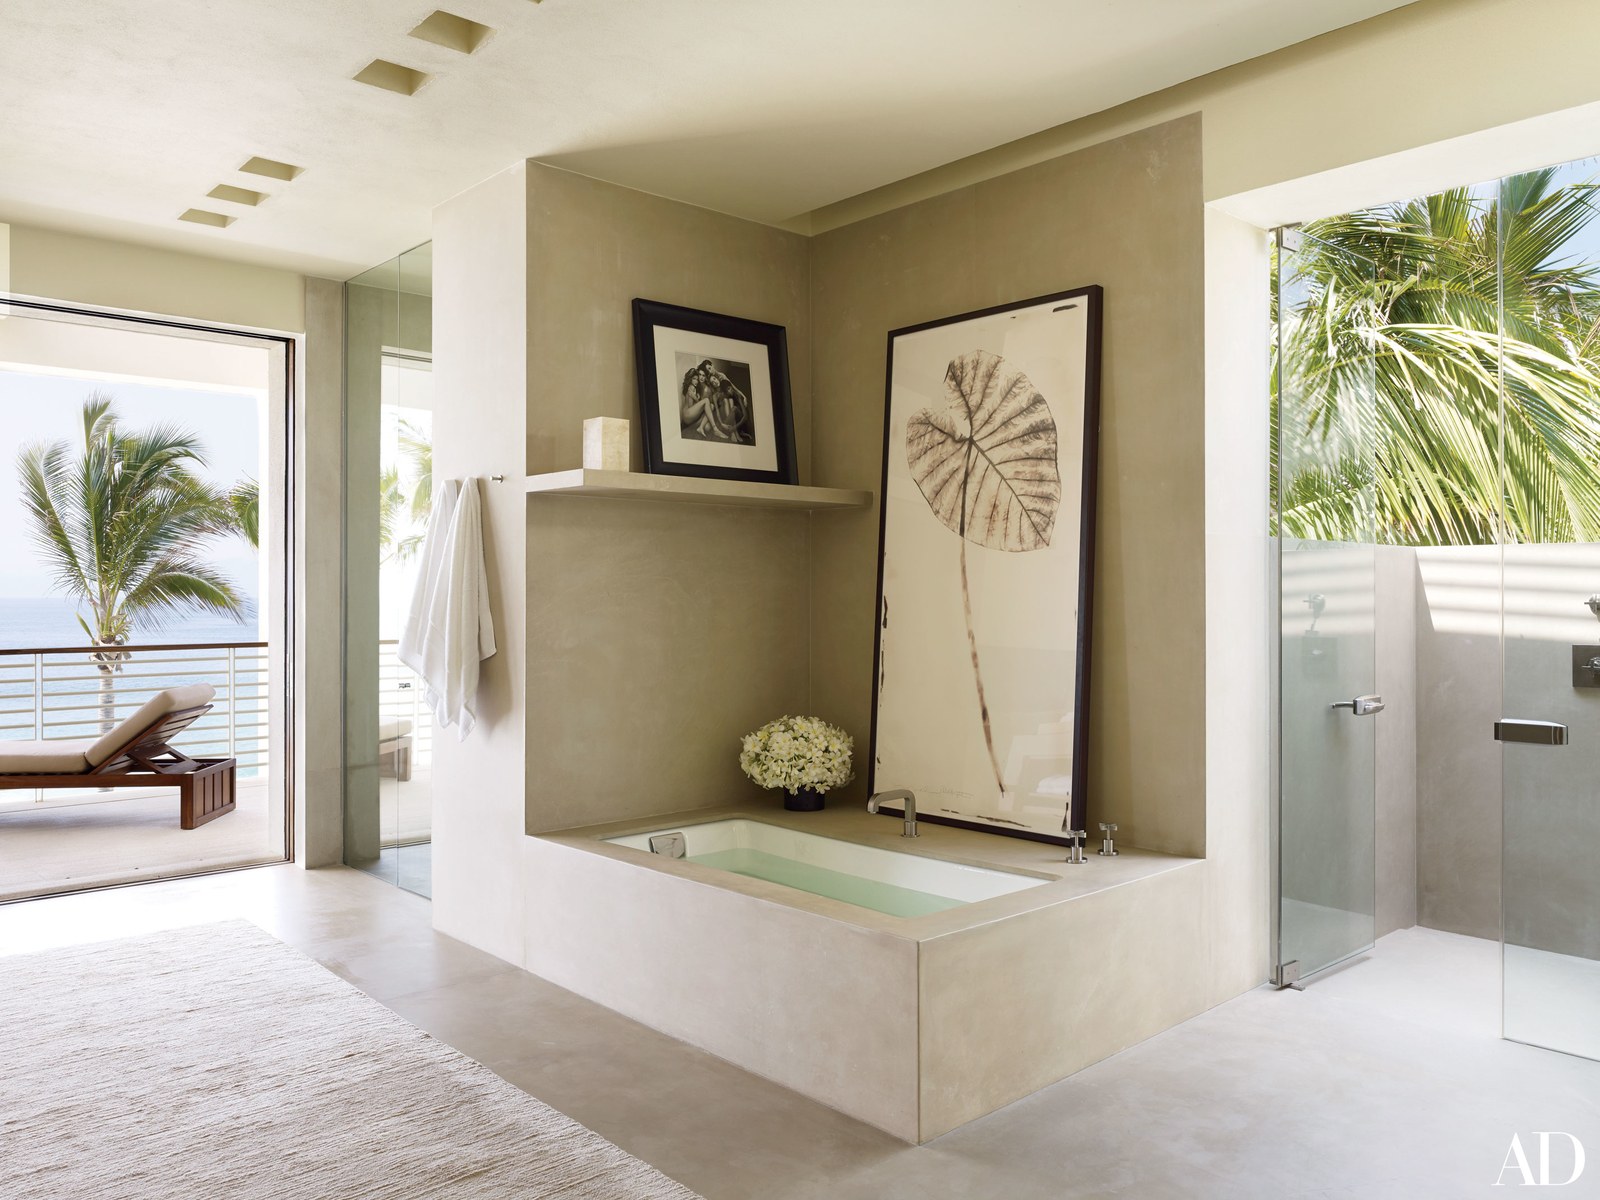 Celebrity Bathrooms You Need To See2